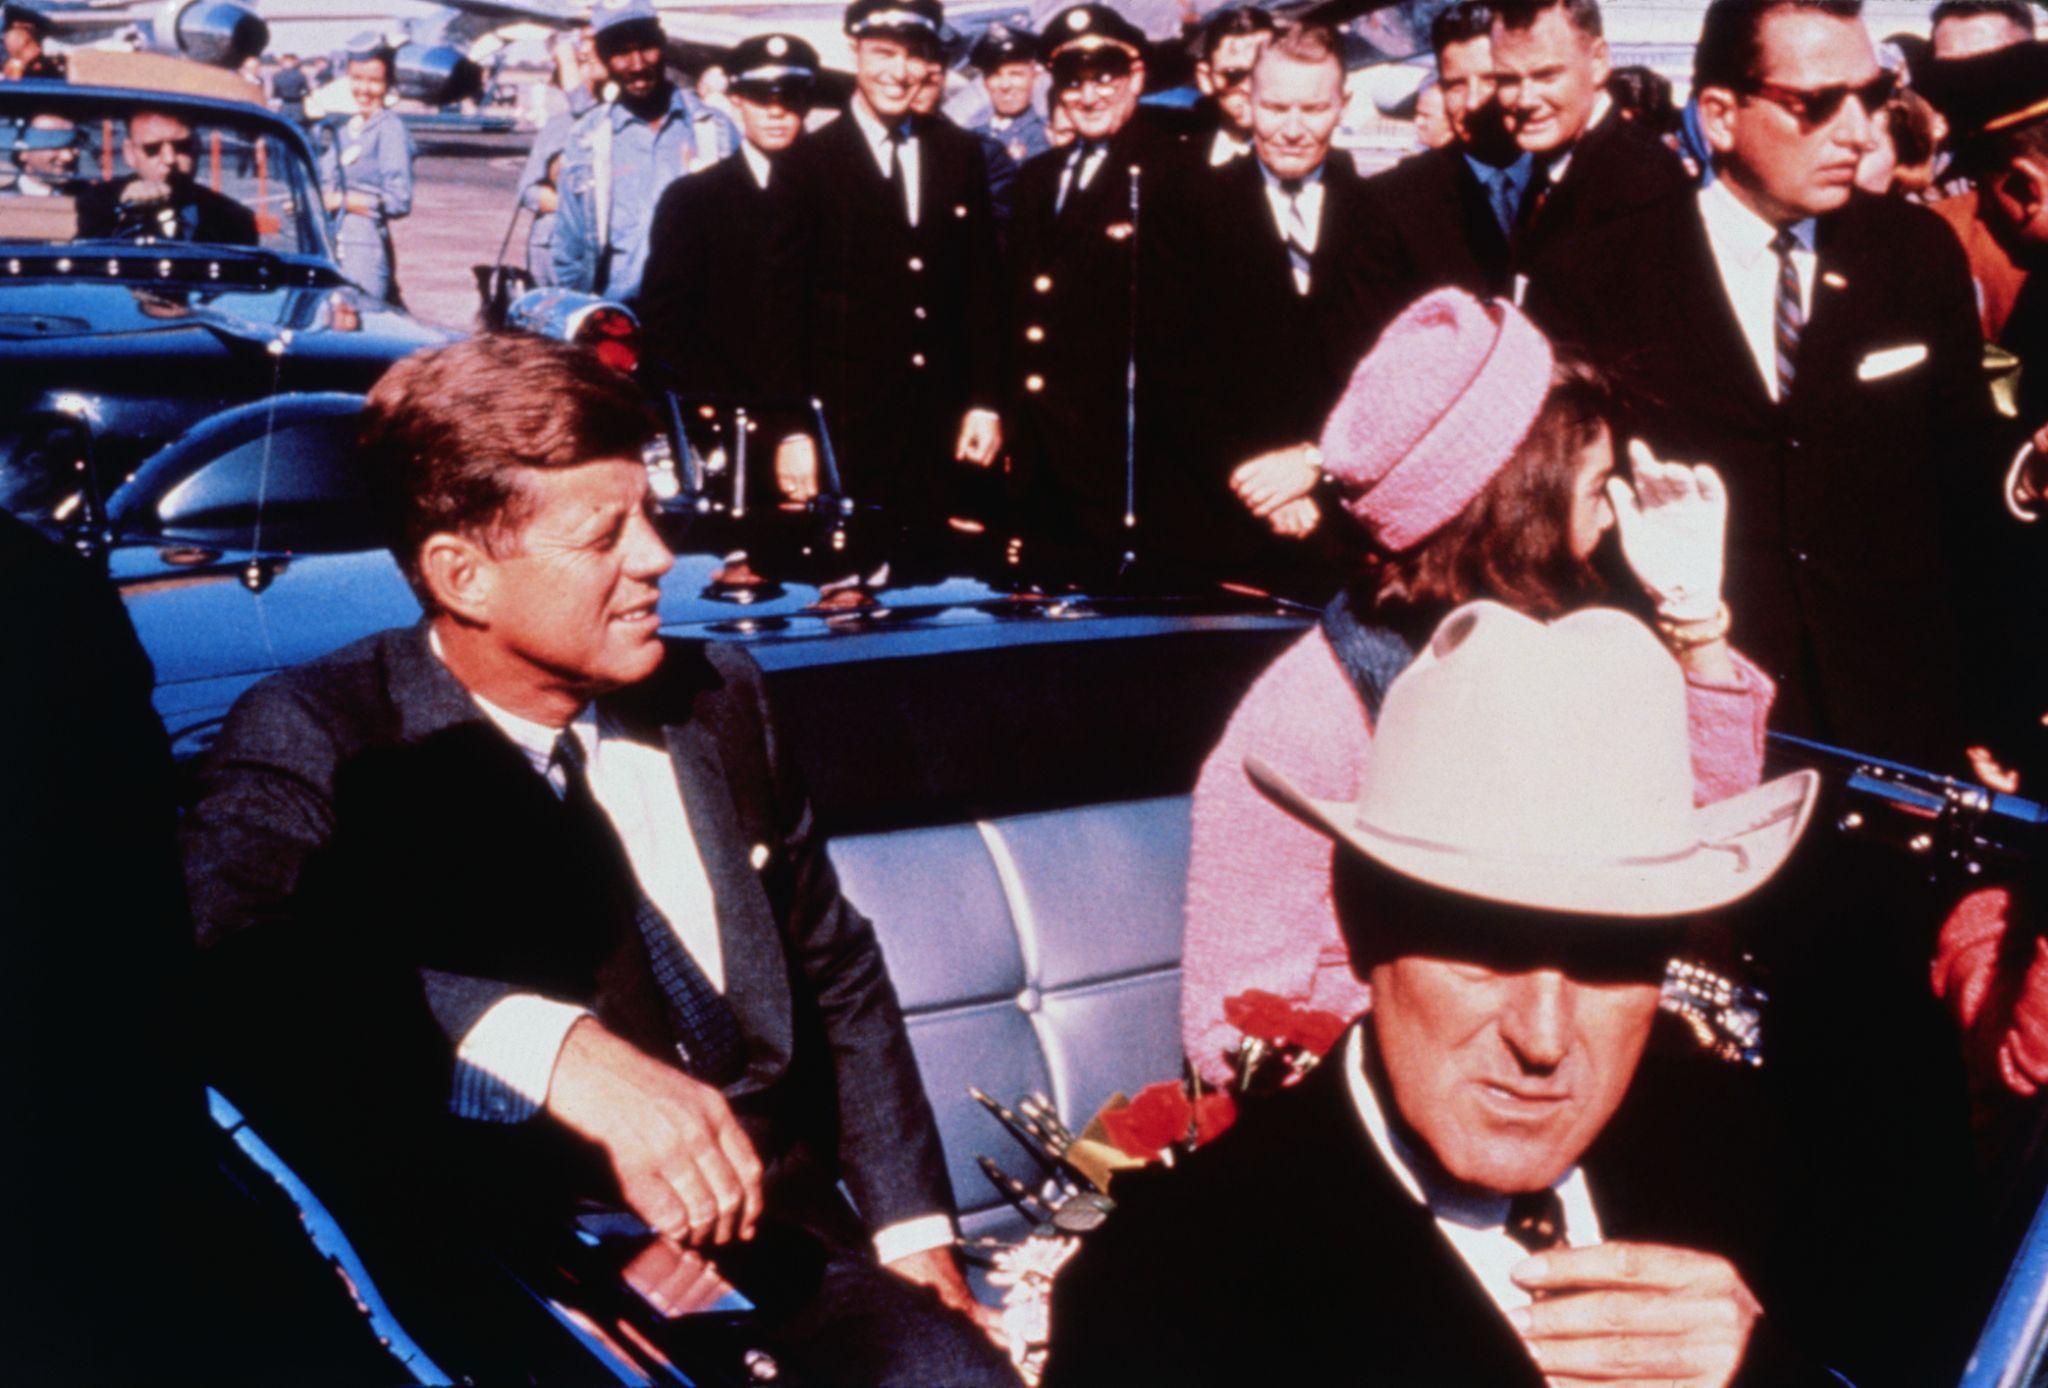 President John F. Kennedy, Jackie Kennedy, and Governor John Connally ride in a limousine on November 22, 1963